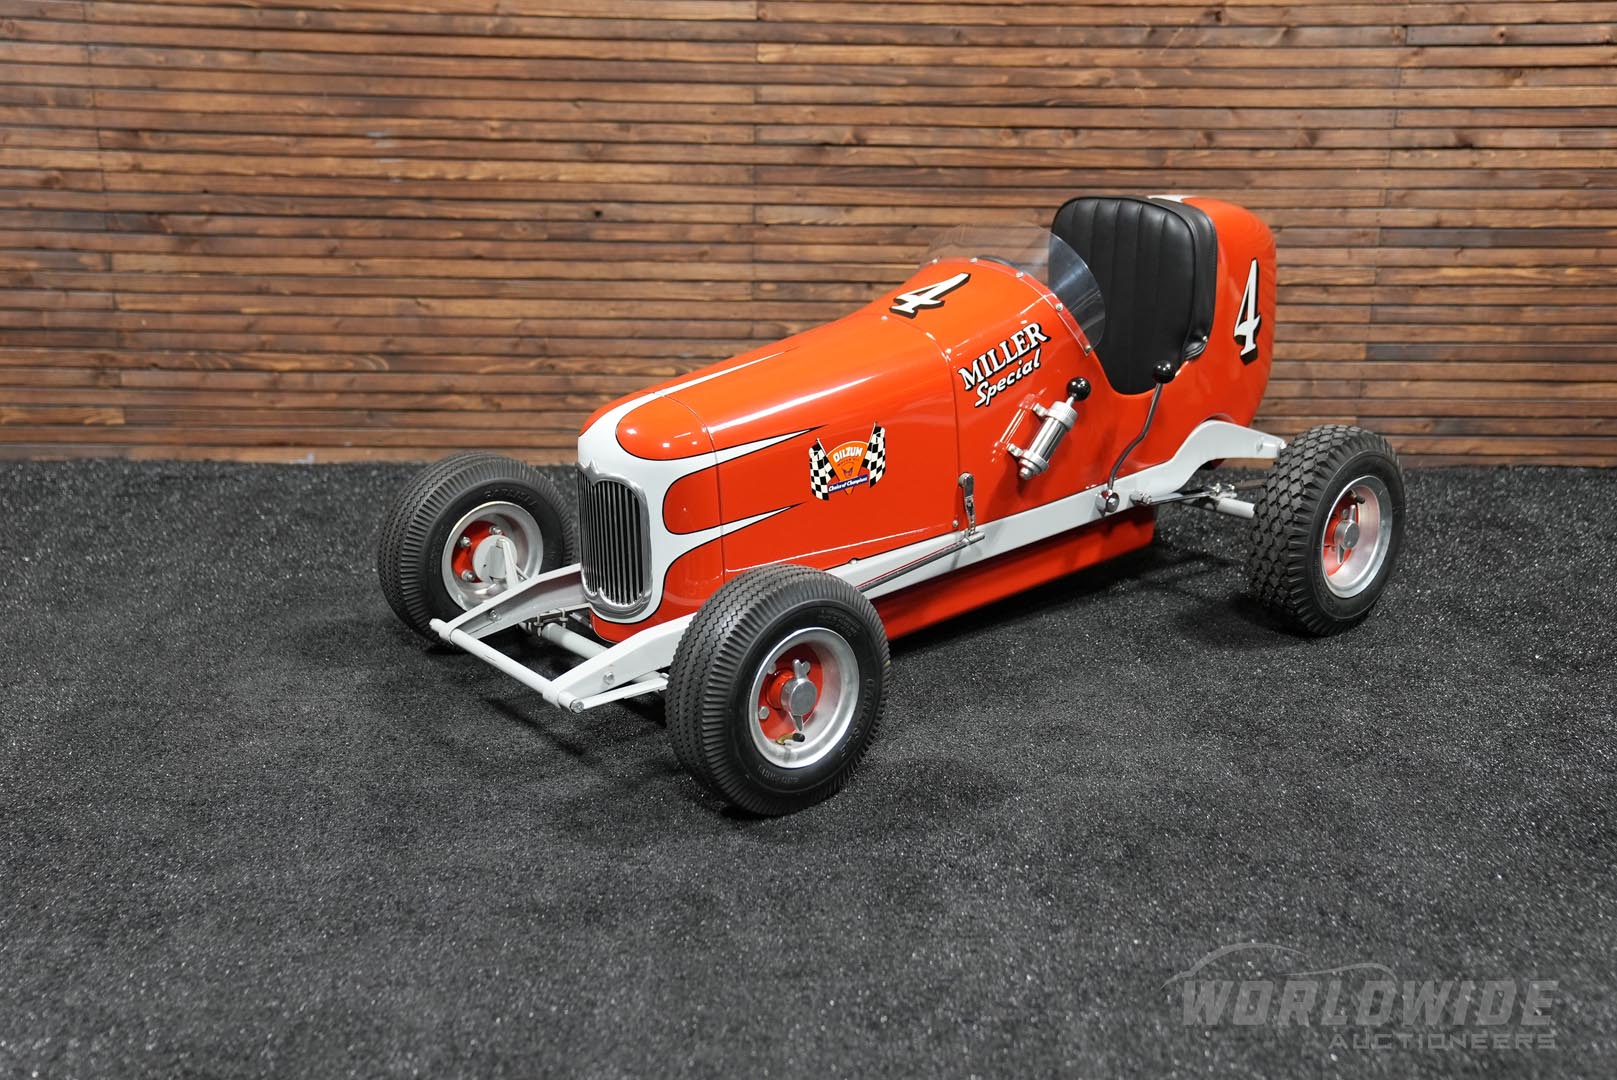 Miller Special Pedal Car by Richard Graves